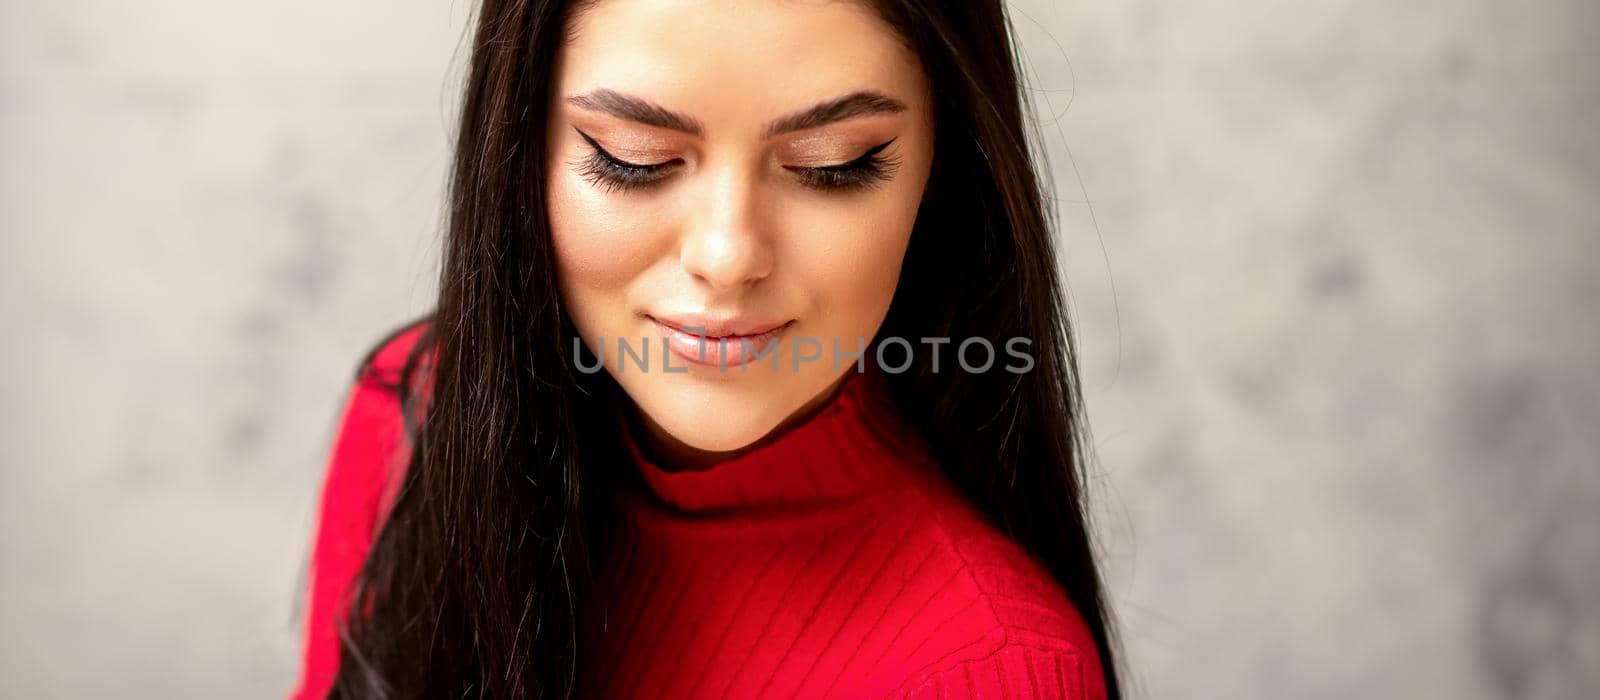 The fashionable young woman. Portrait of the beautiful female model with long hair and makeup with eyelash extensions. Beauty young caucasian woman with a black hairstyle. by okskukuruza